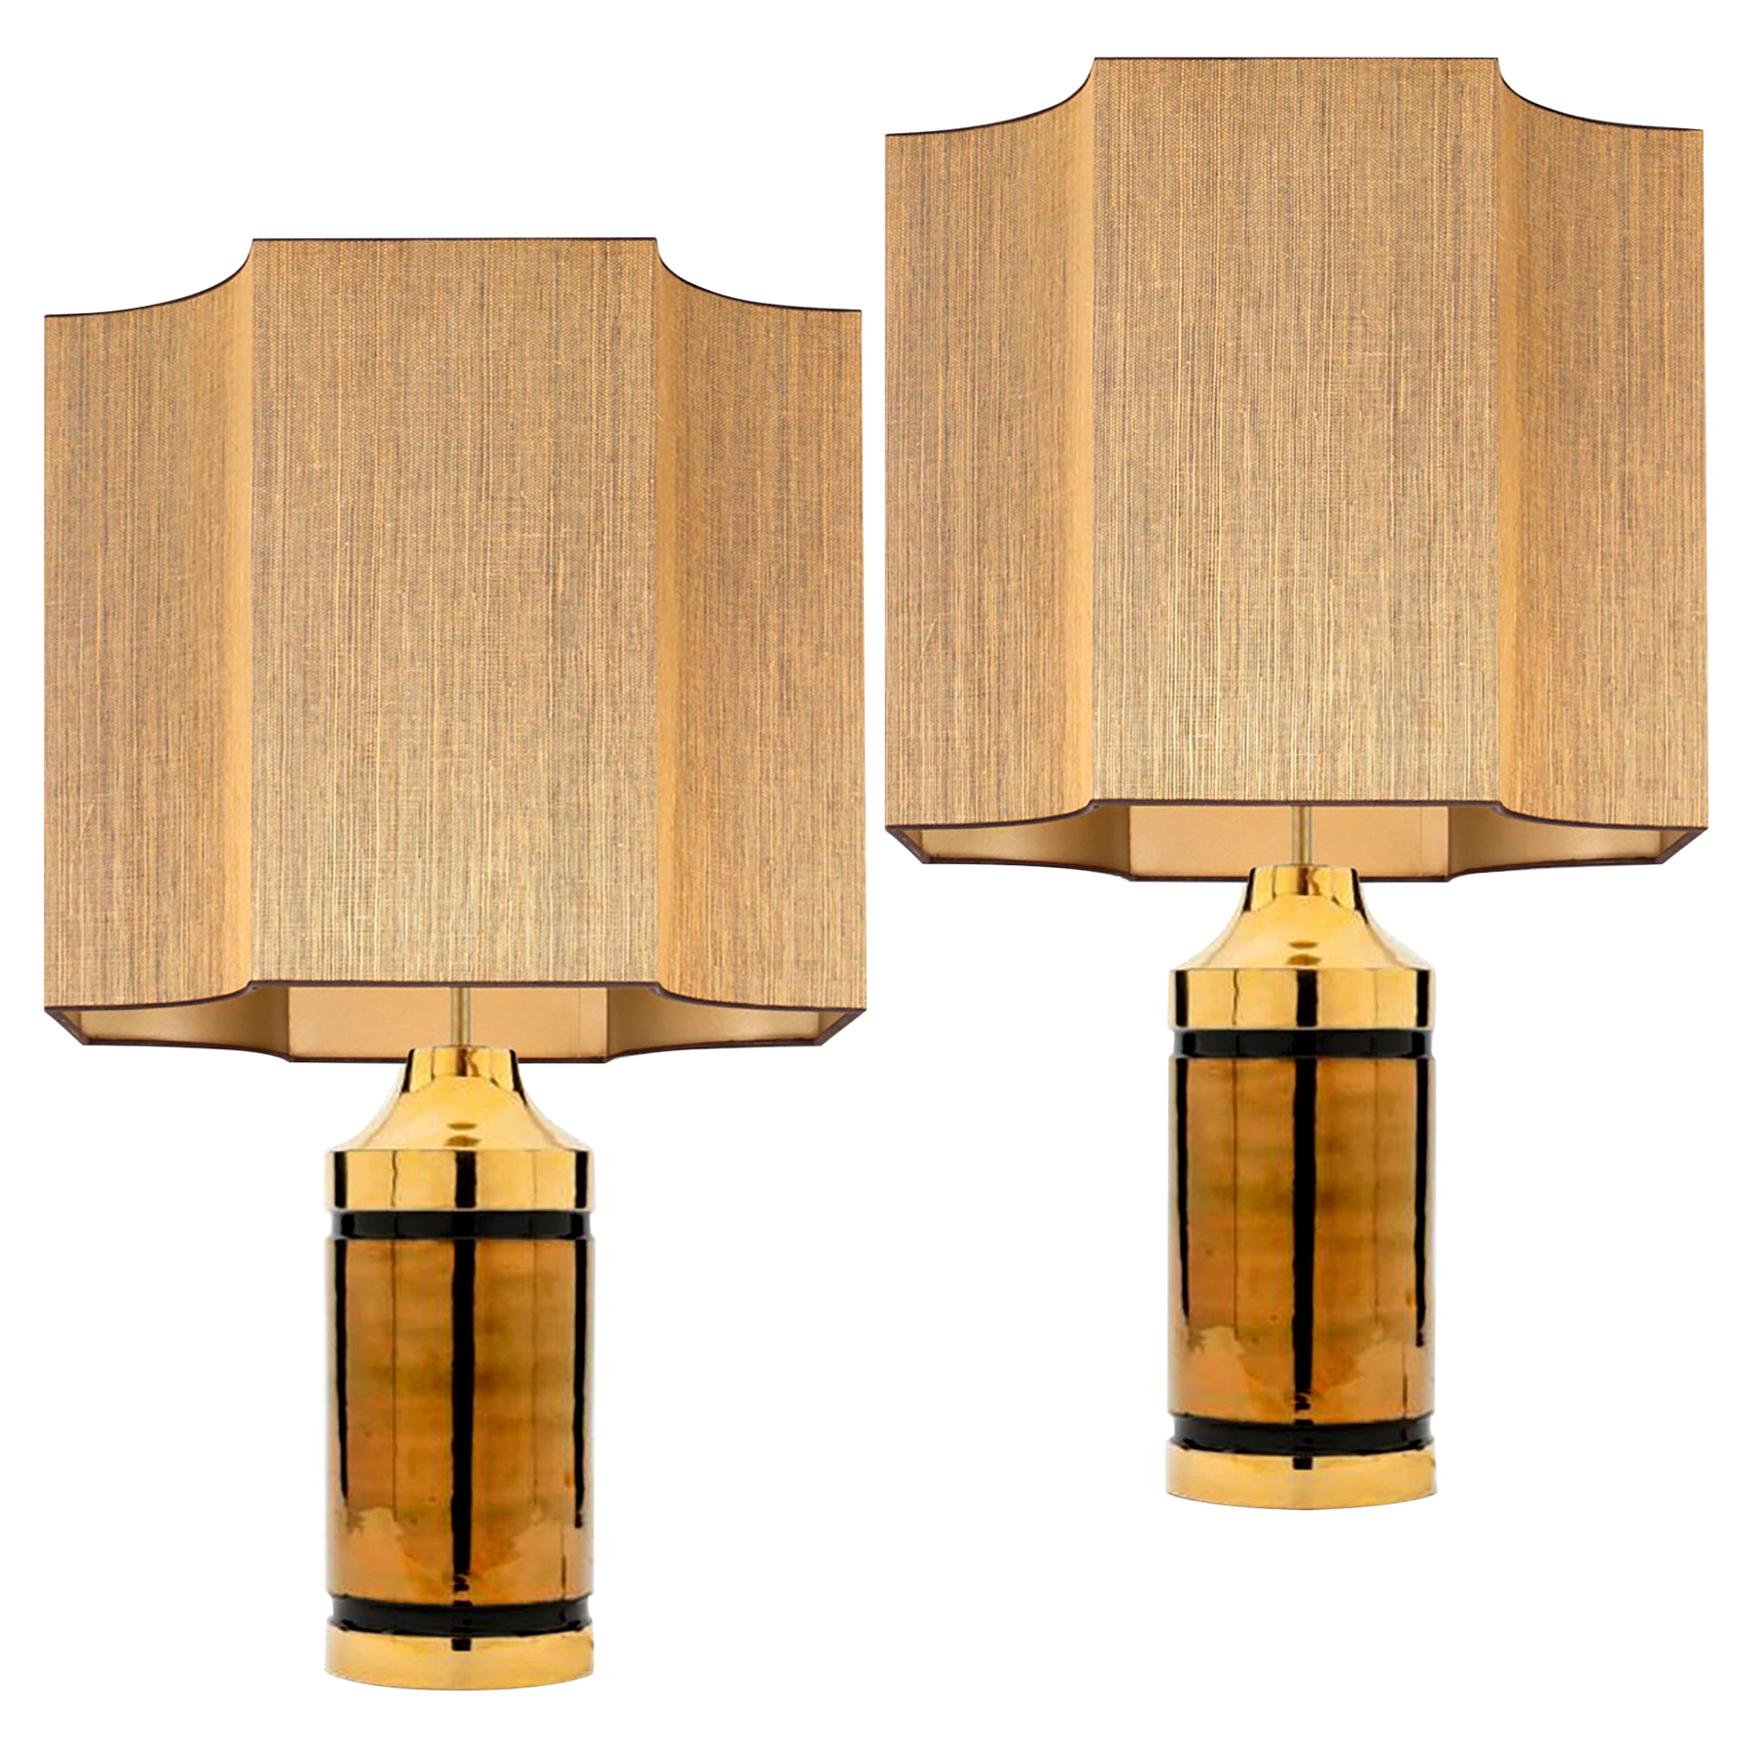 Pair of Large Bitossi Lamps for Bergboms, with Custom Made Shade by Rene Houben